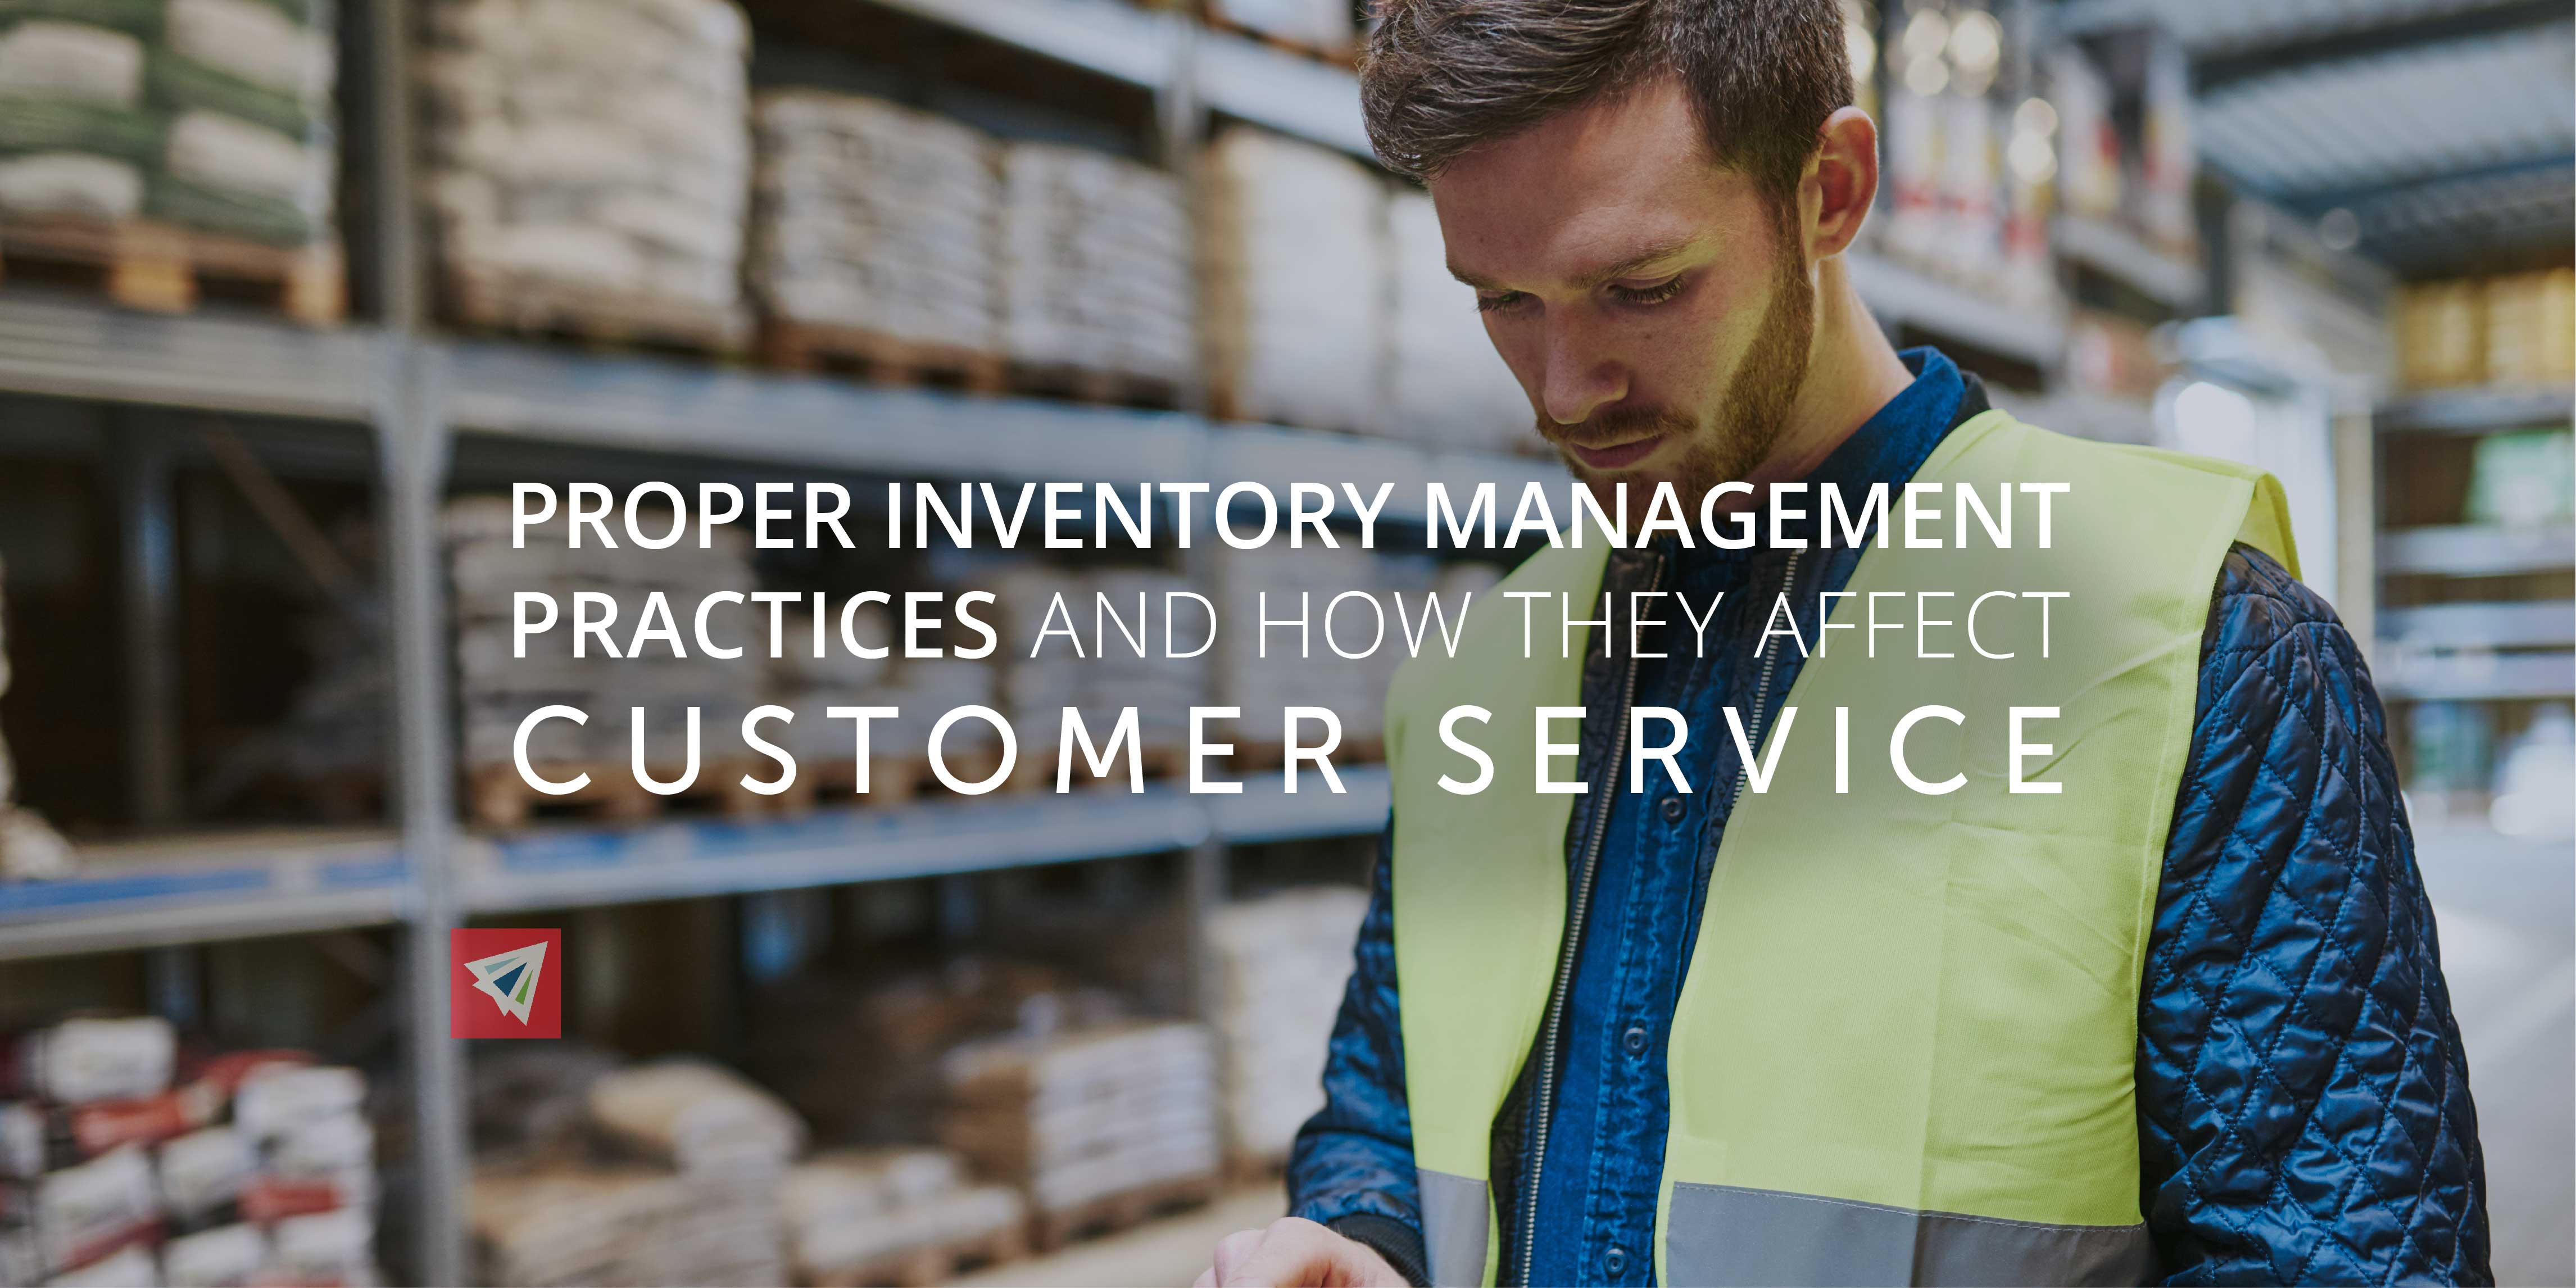 Proper Inventory Management Practices – How They Affect Customer Service